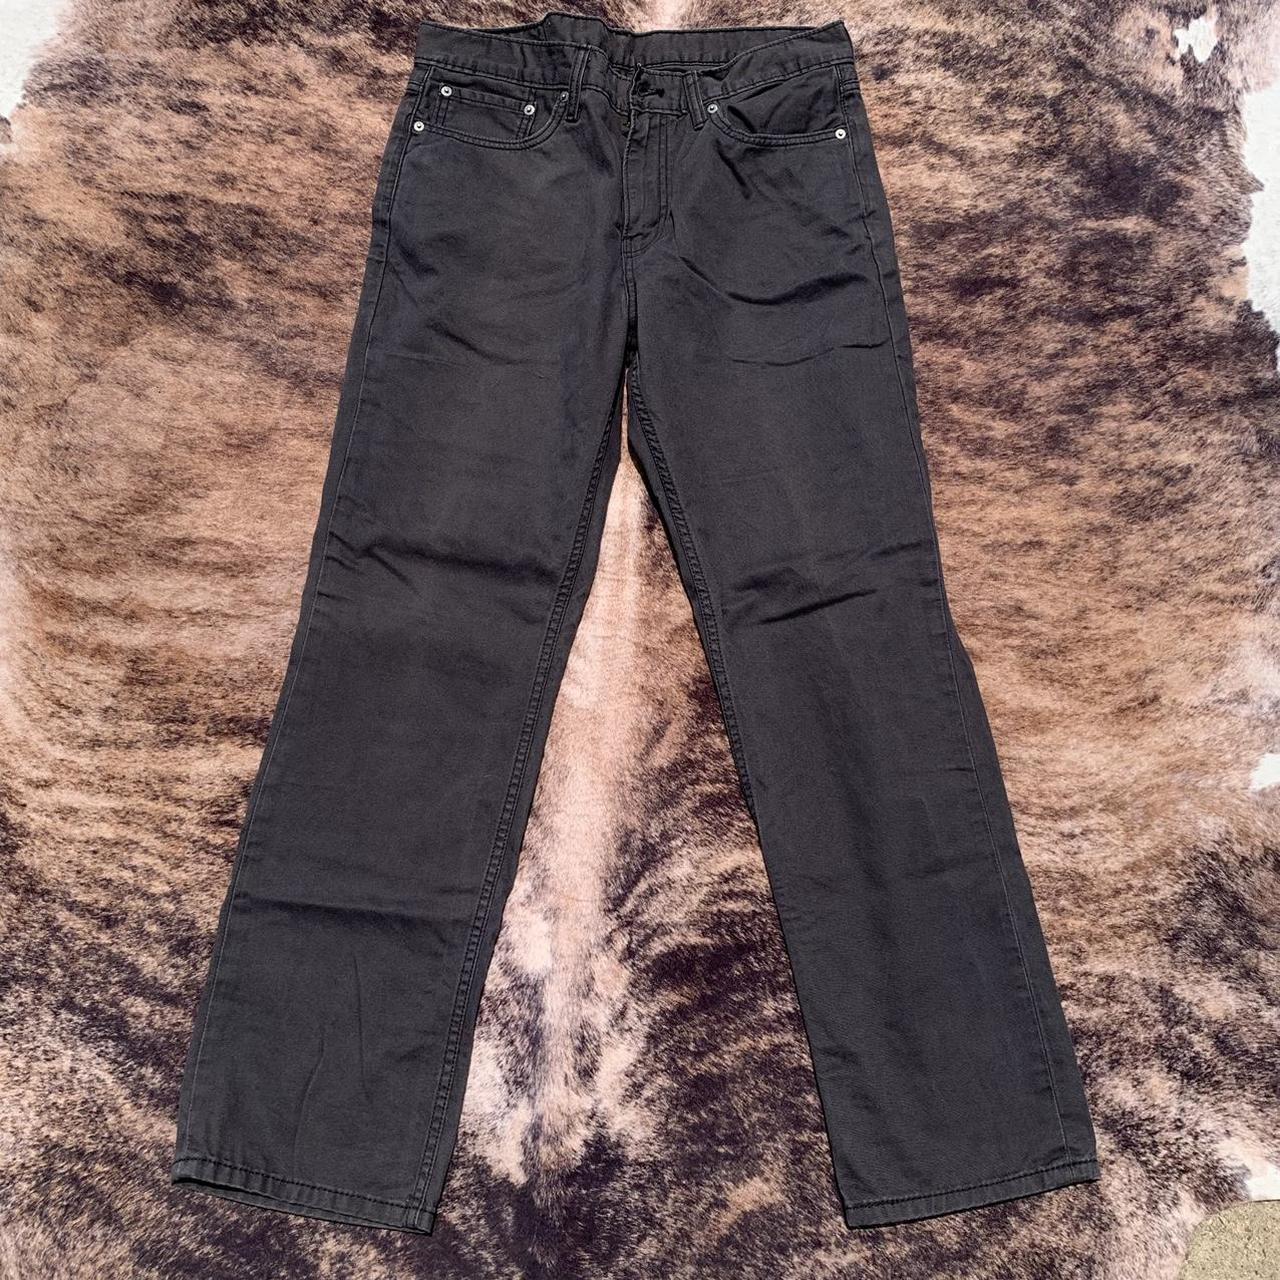 Levi 514 Jeans 33X30, In good used condition. 514 is